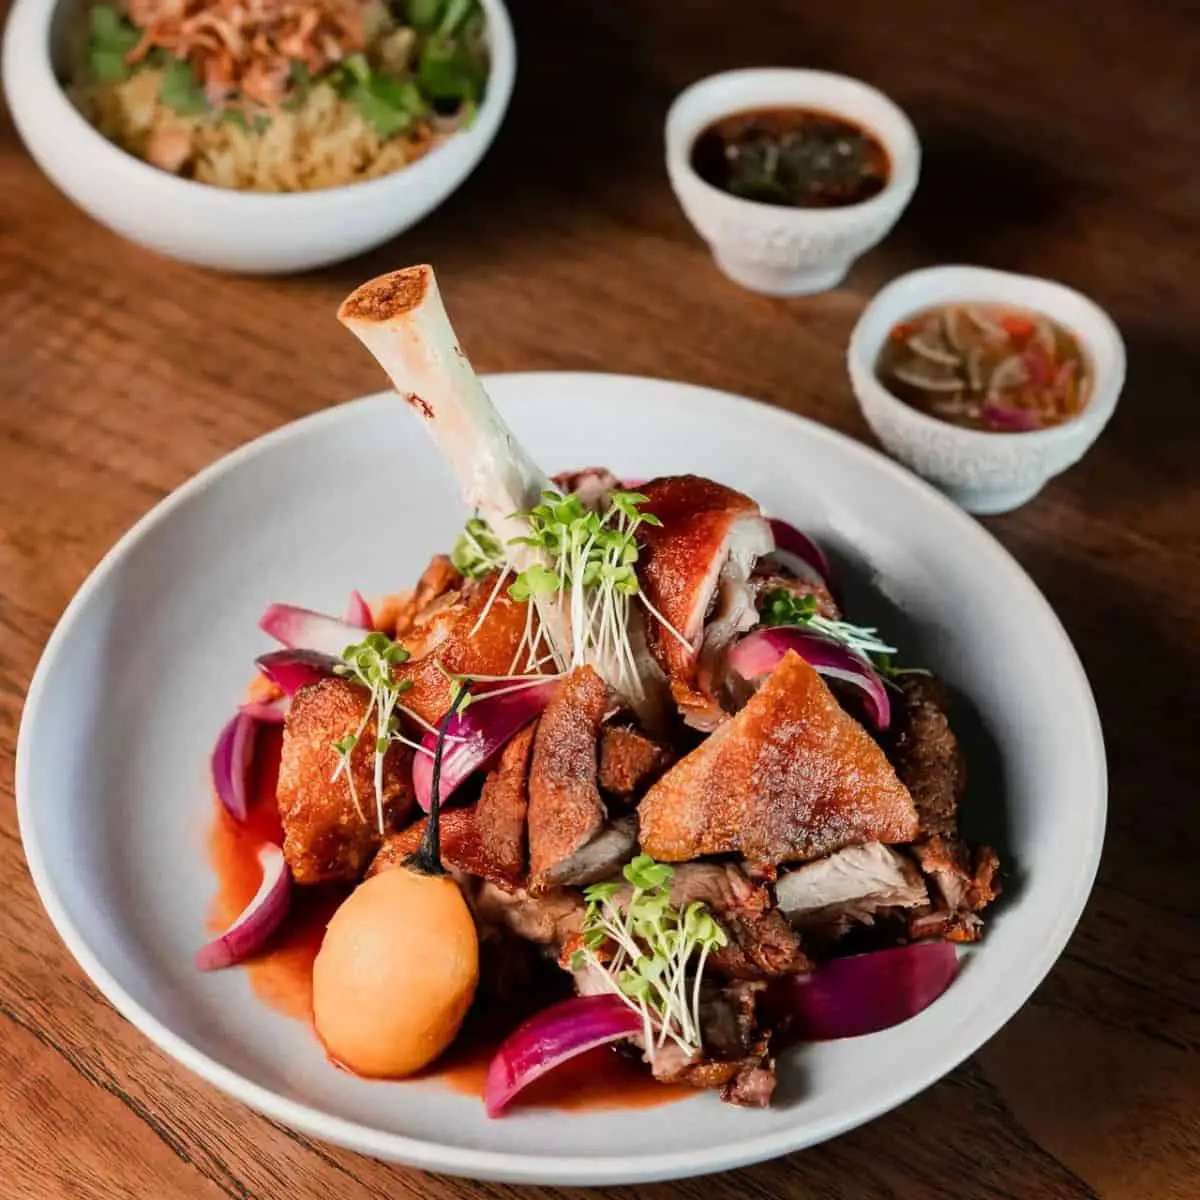 A full serving of crispy pork hock with tamarillo and small plates of side dishes from Mamasan